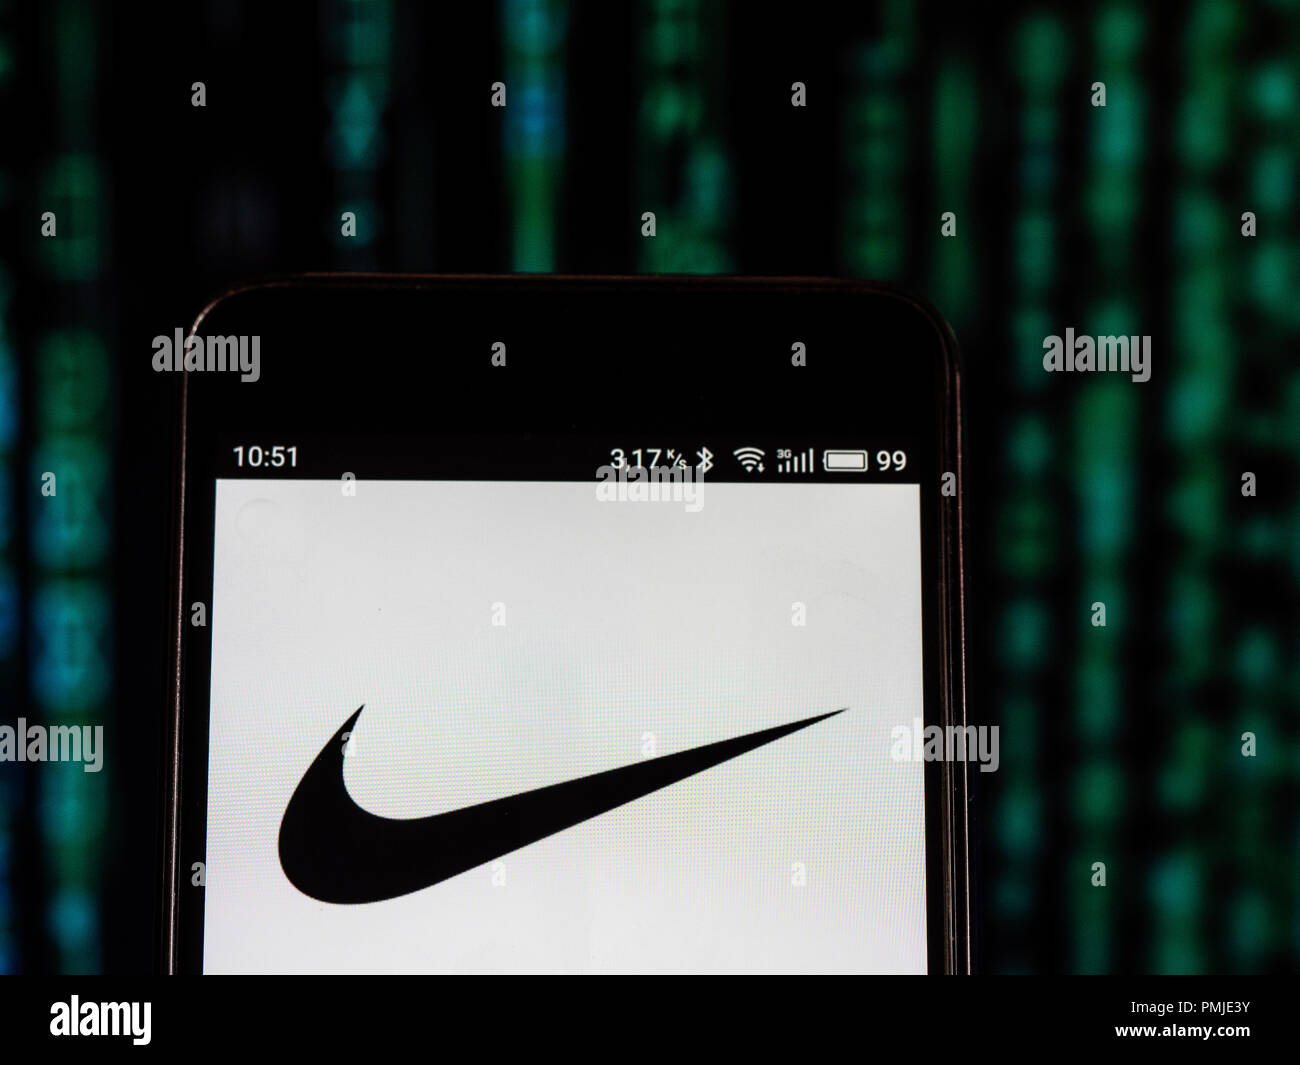 Nike Footwear manufacturing company logo seen displayed a smart phone. Nike, an American multinational corporation is engaged in the design, development, manufacturing, and worldwide marketing and sales of